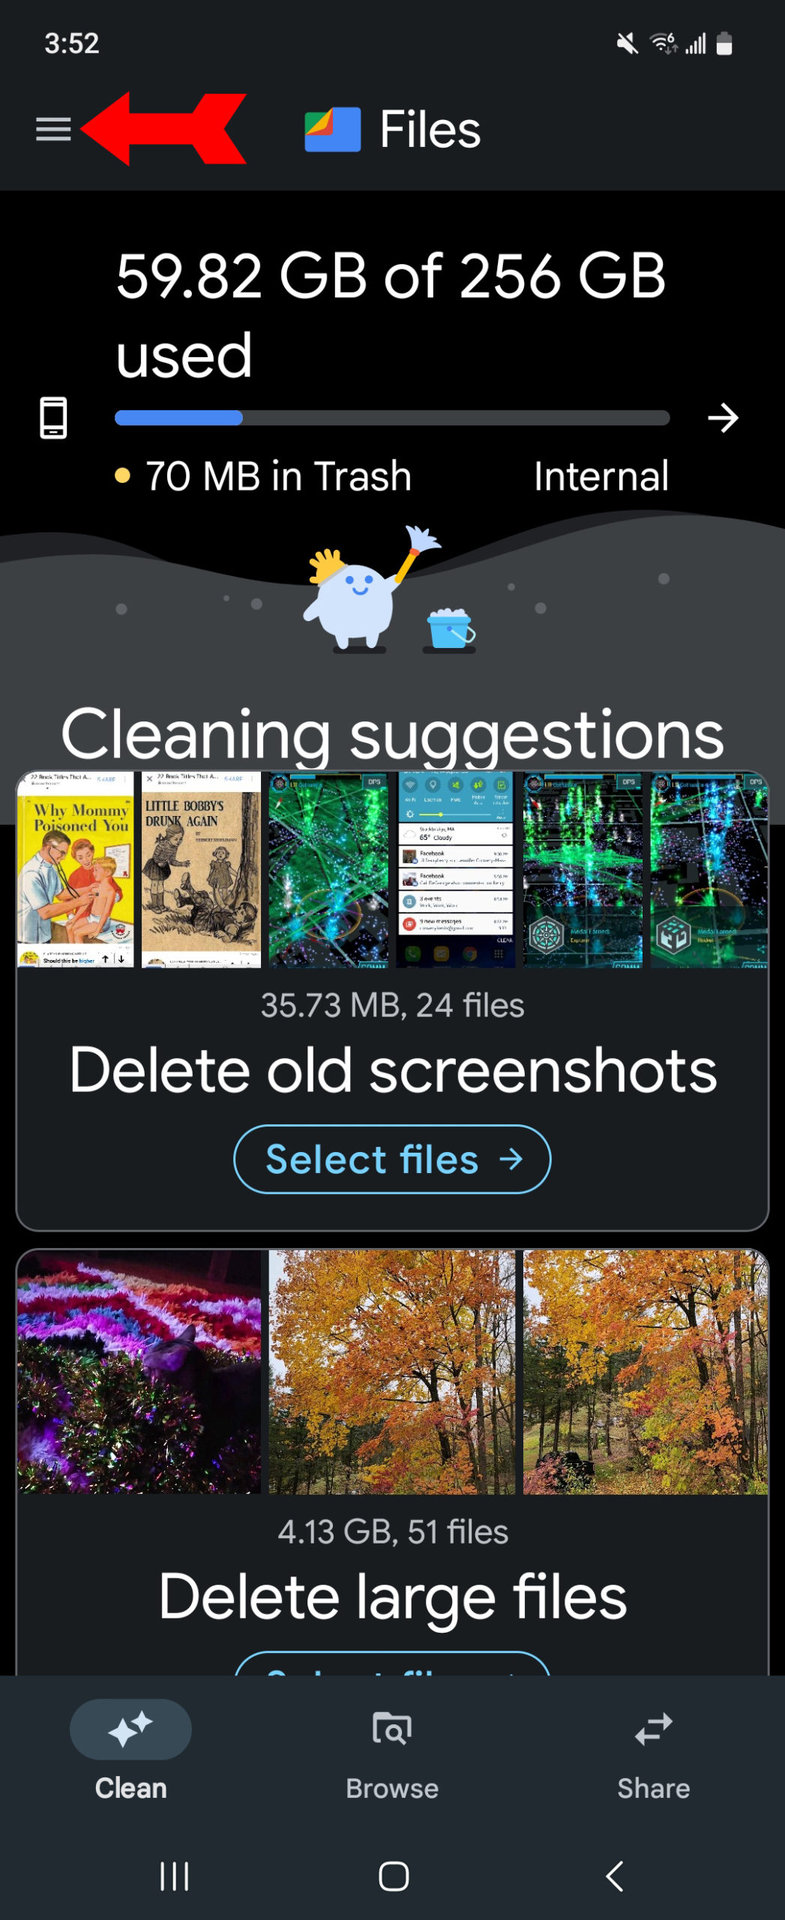 Files by Google Tap on Clean